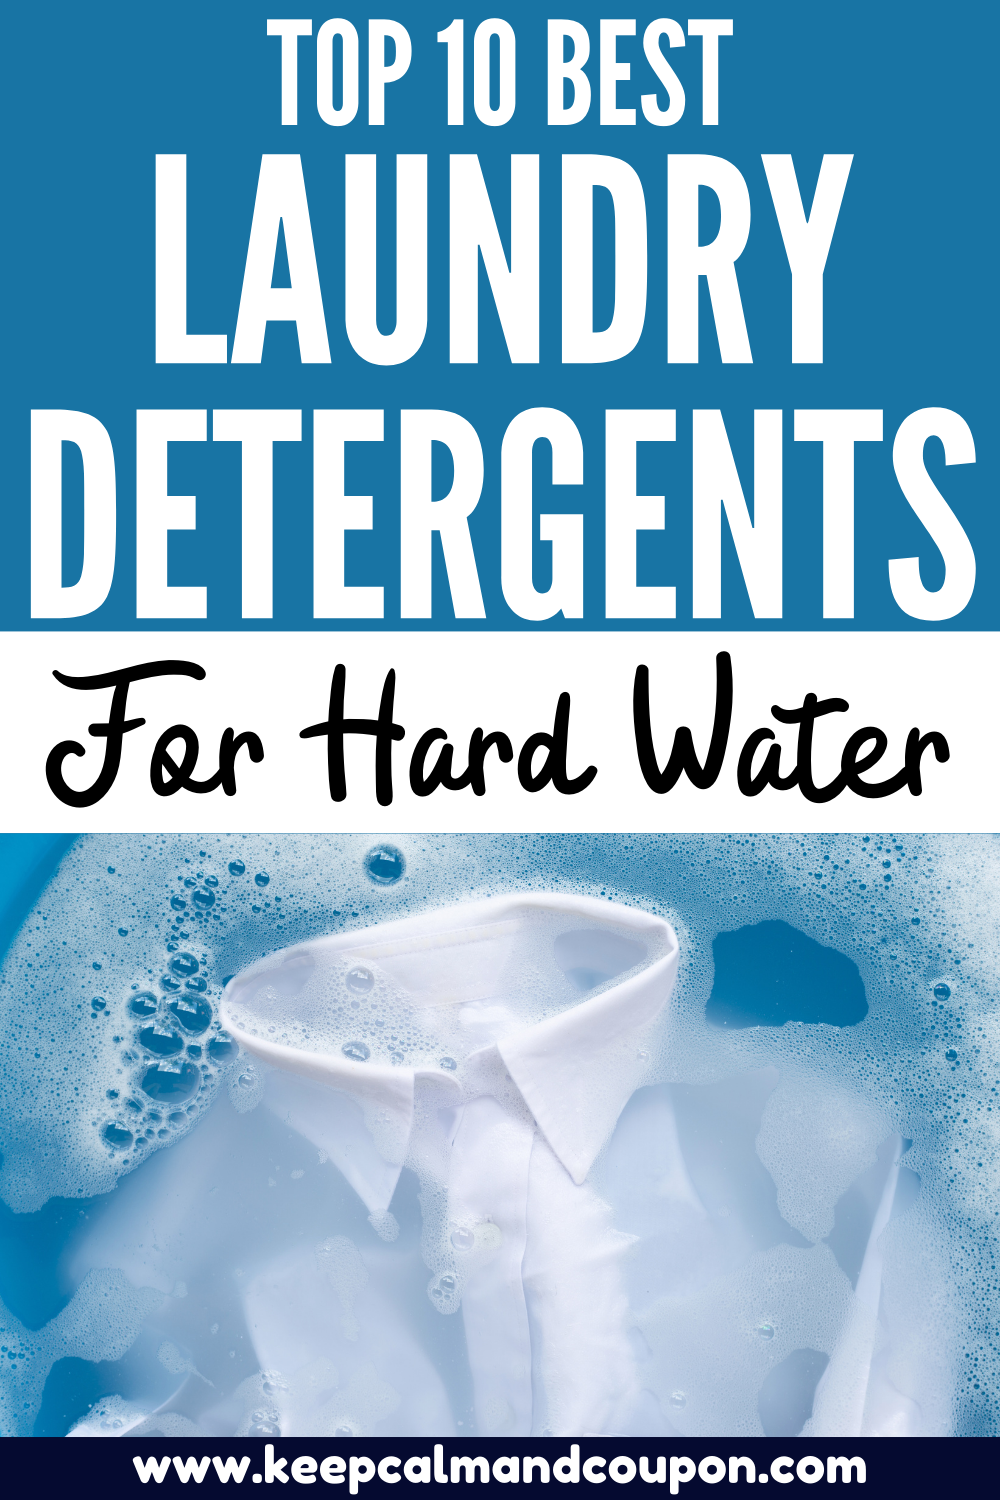 Best-Laundry-Detergents-for-Hard-Waters